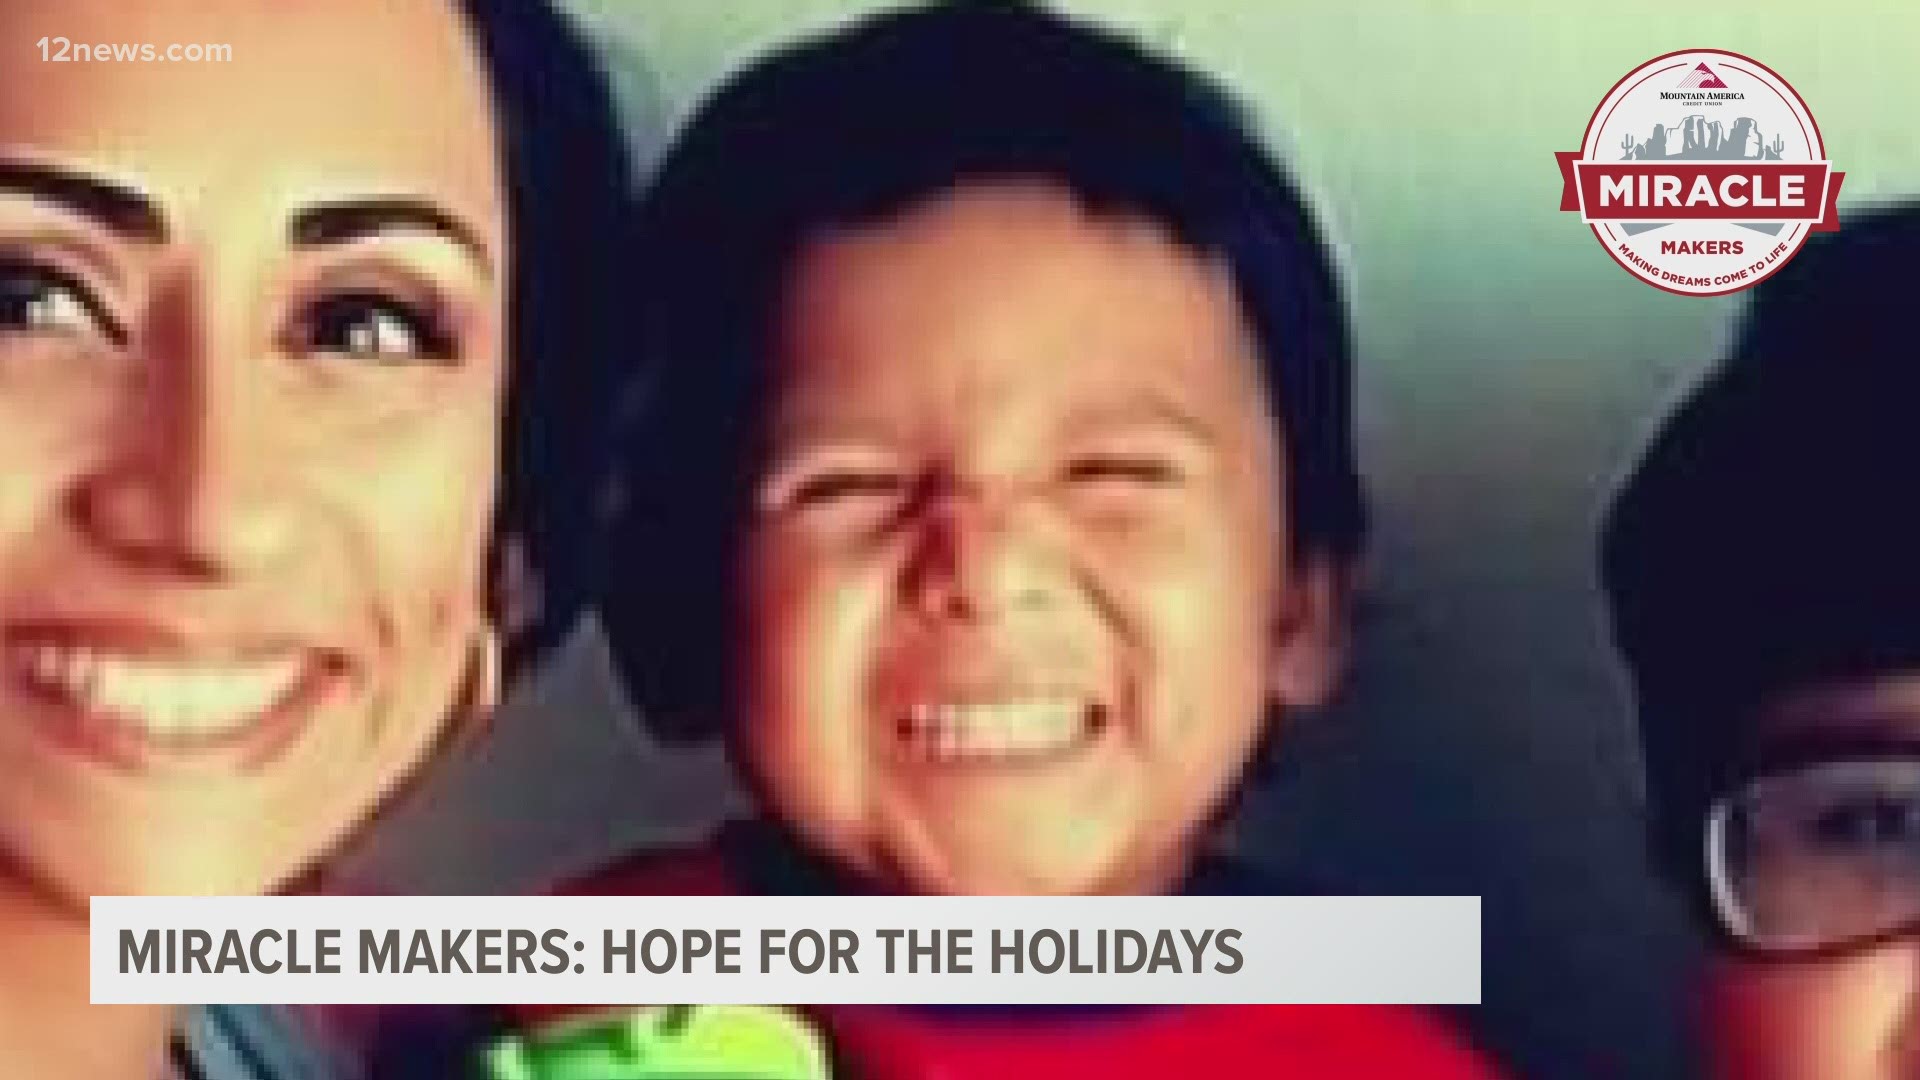 The Miracle Makers heard Maria’s request and brought a Christmas surprise and some hope to the family.